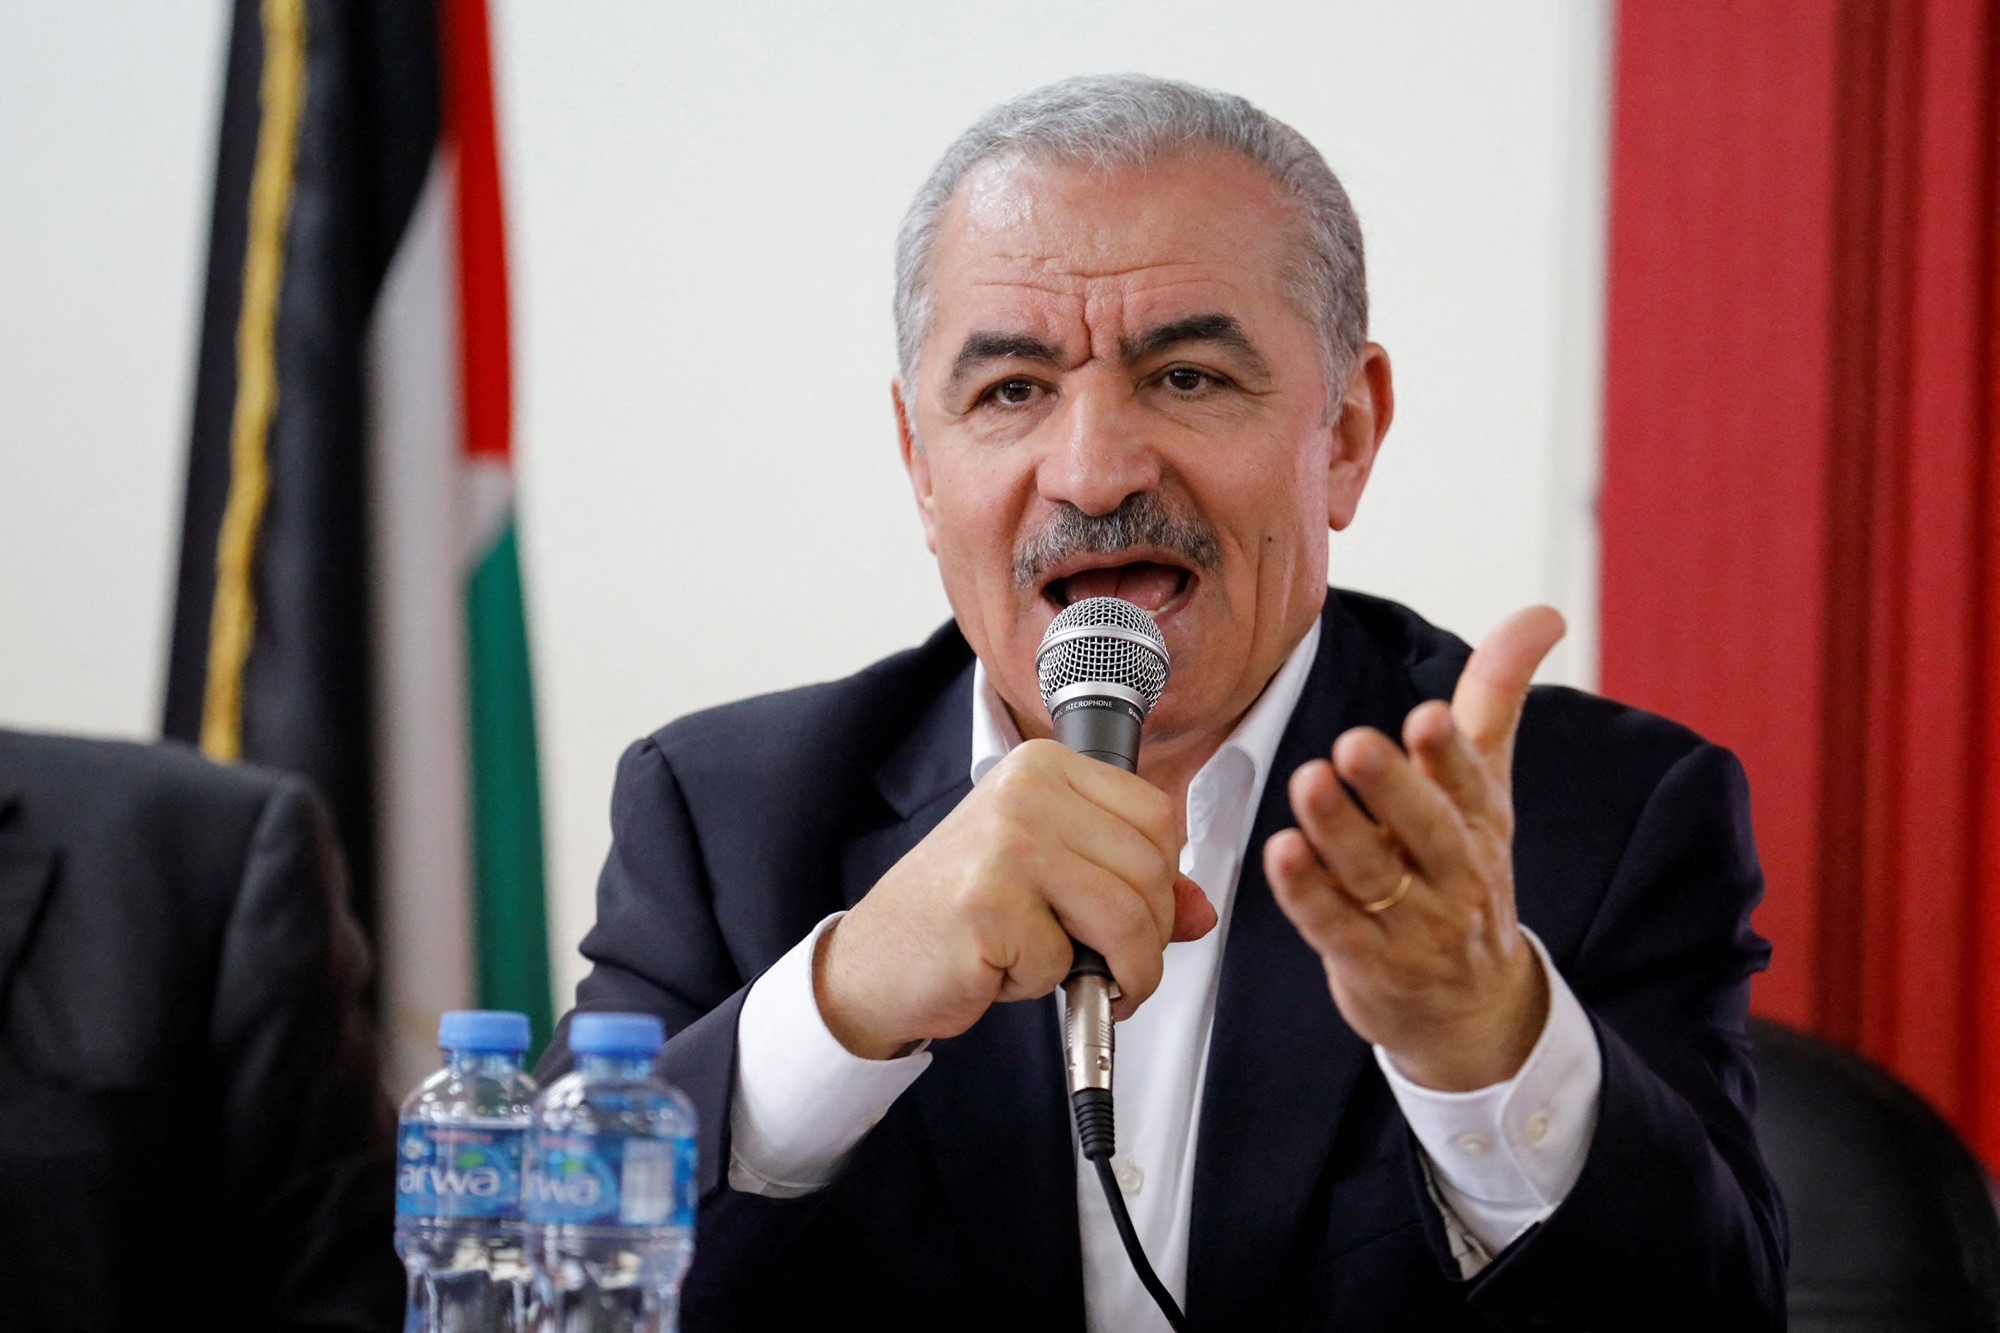 An older Palestinian man with short hair and a neat moustache speaks into a microphone while seated.